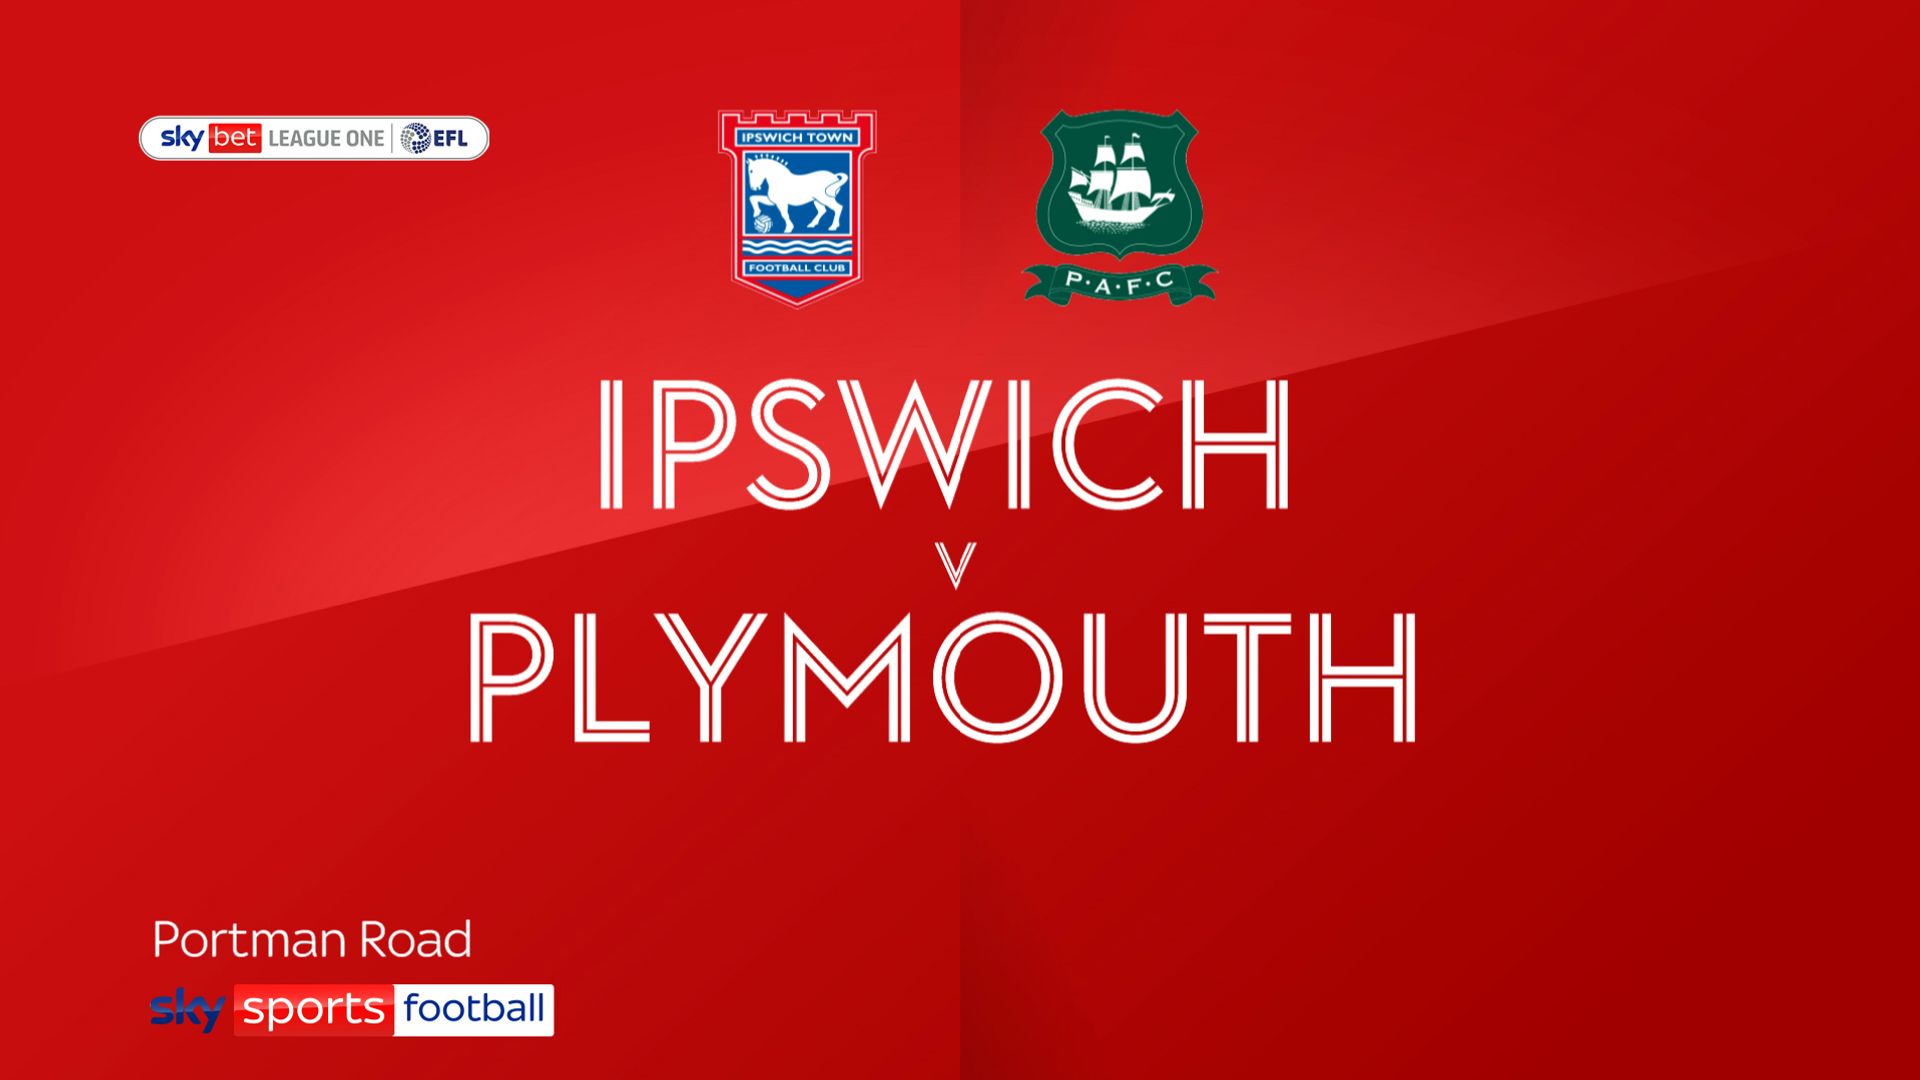 Morsy steers Ipswich past Plymouth